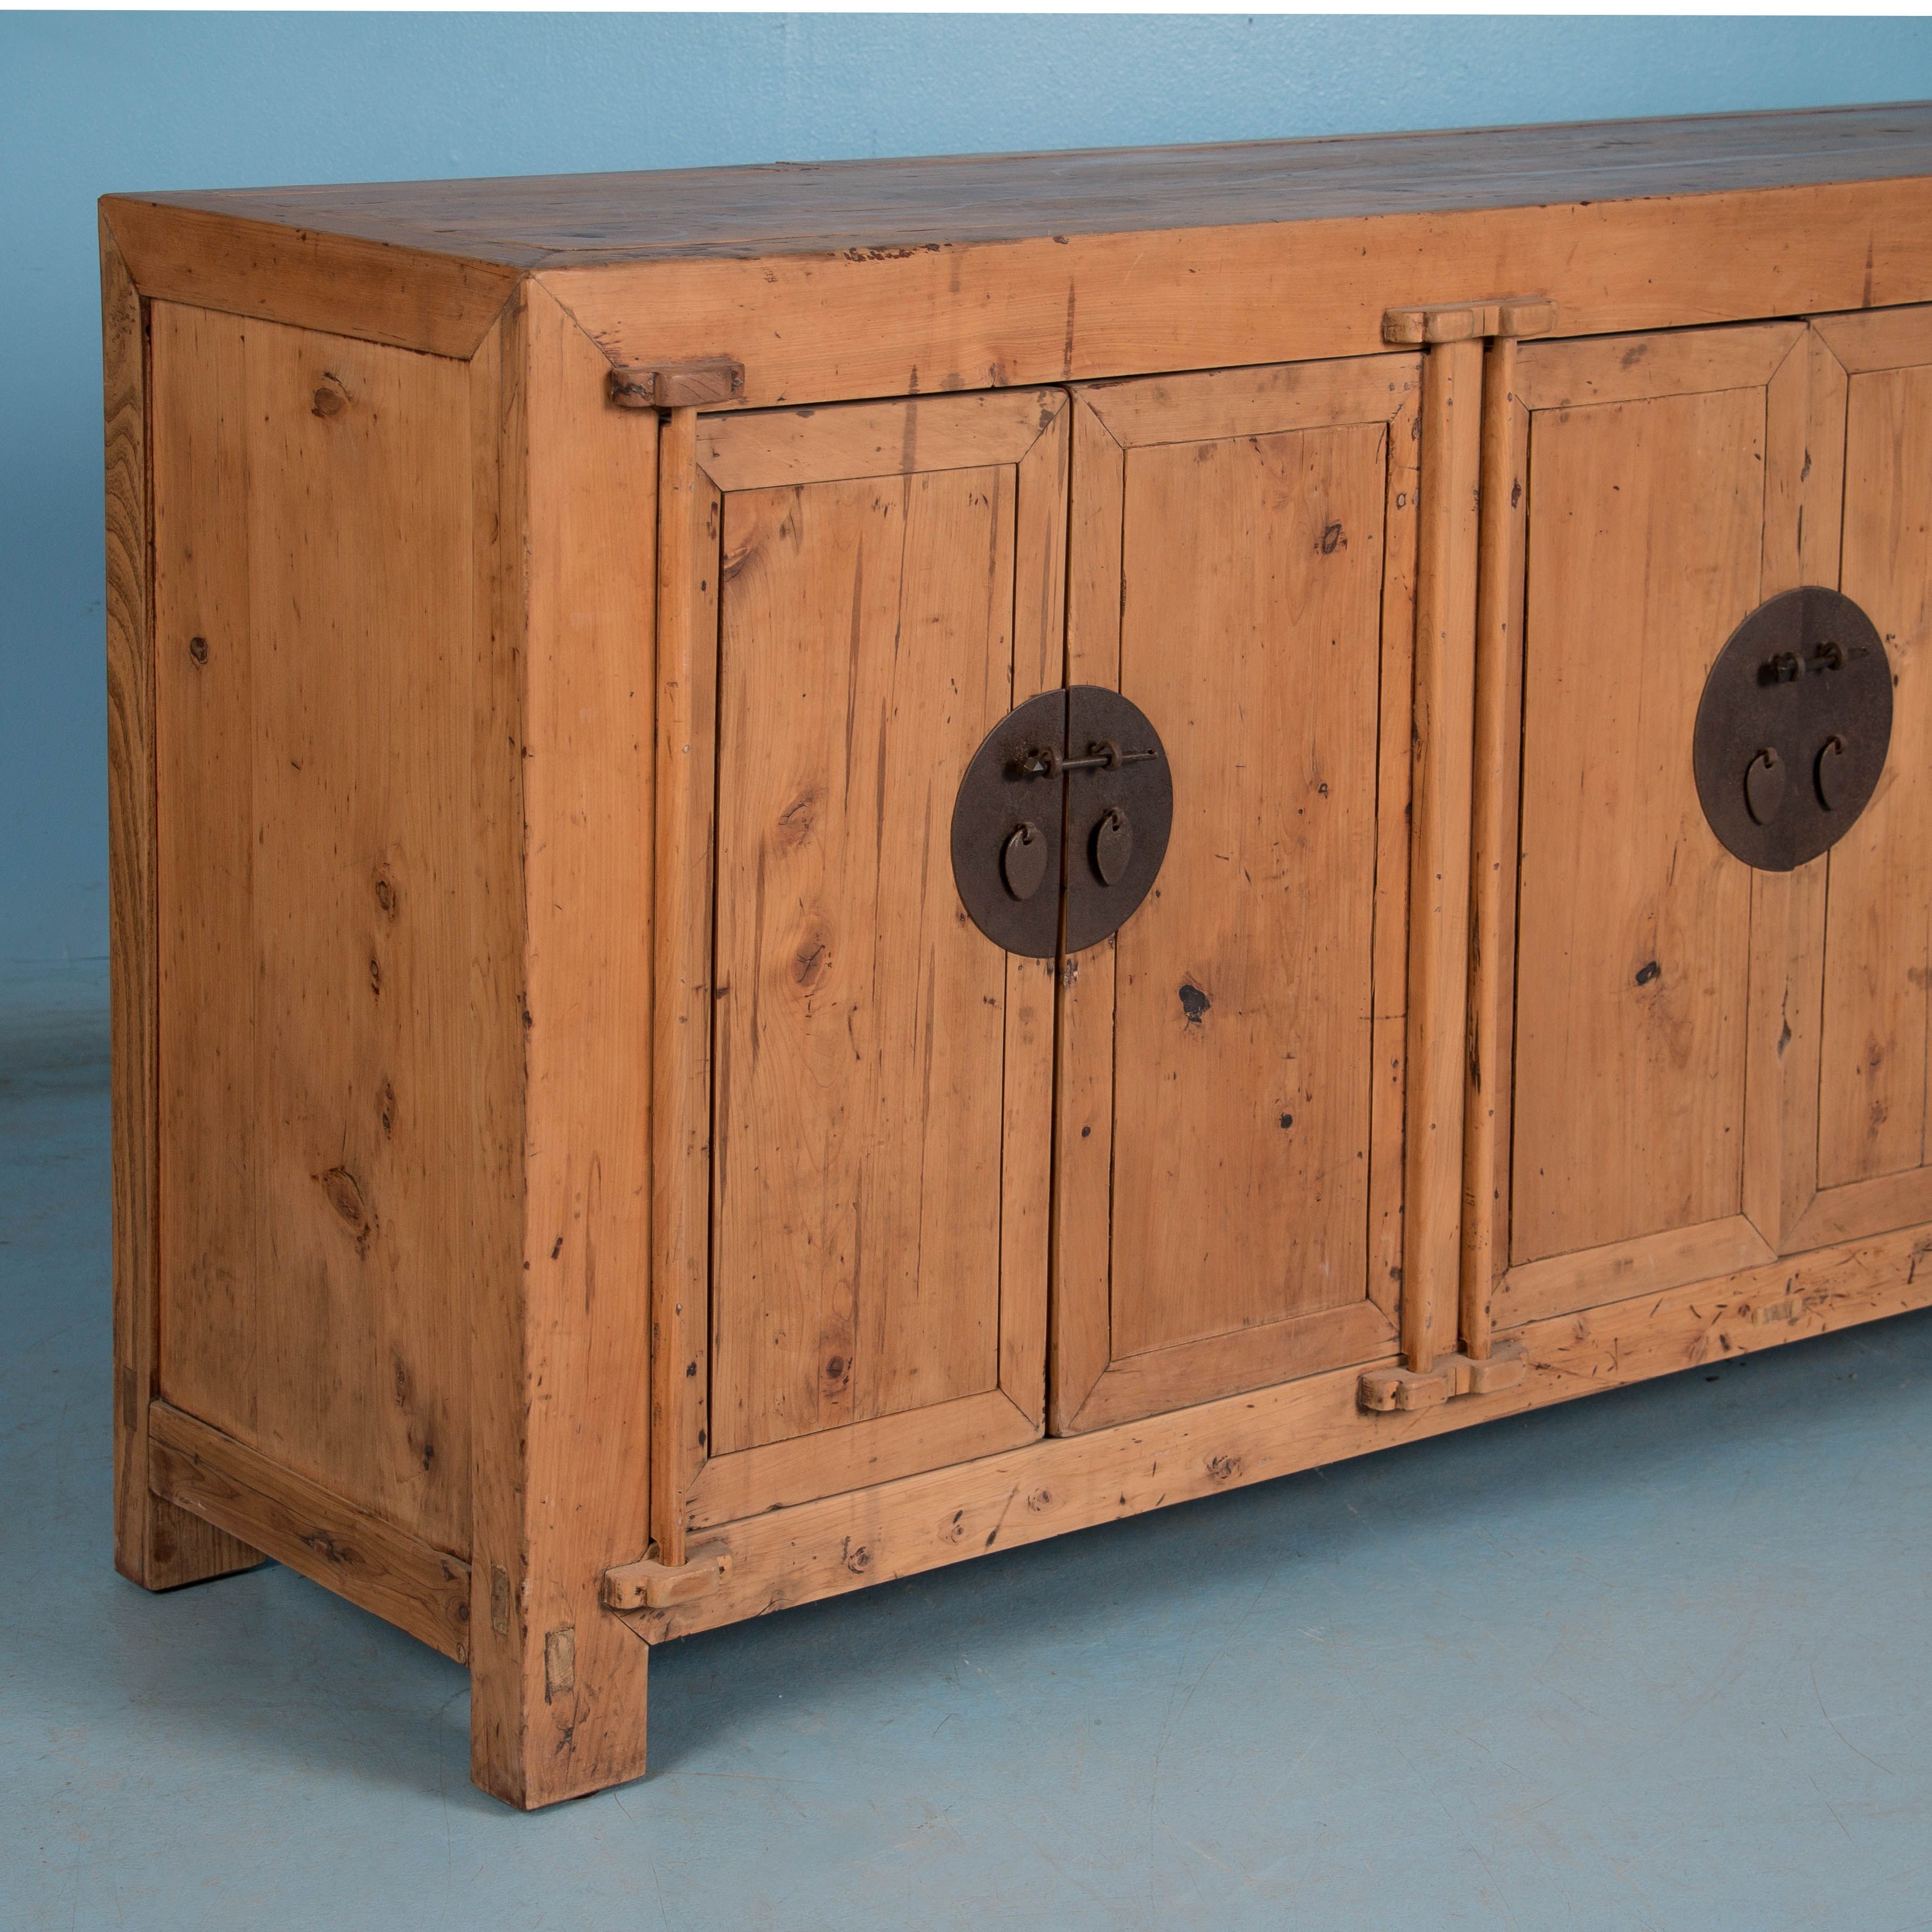 Sideboards | Scandinavian Antiques | Antique Furniture For Sale In Most Up To Date Natural Oak Wood 78 Inch Sideboards (View 10 of 20)